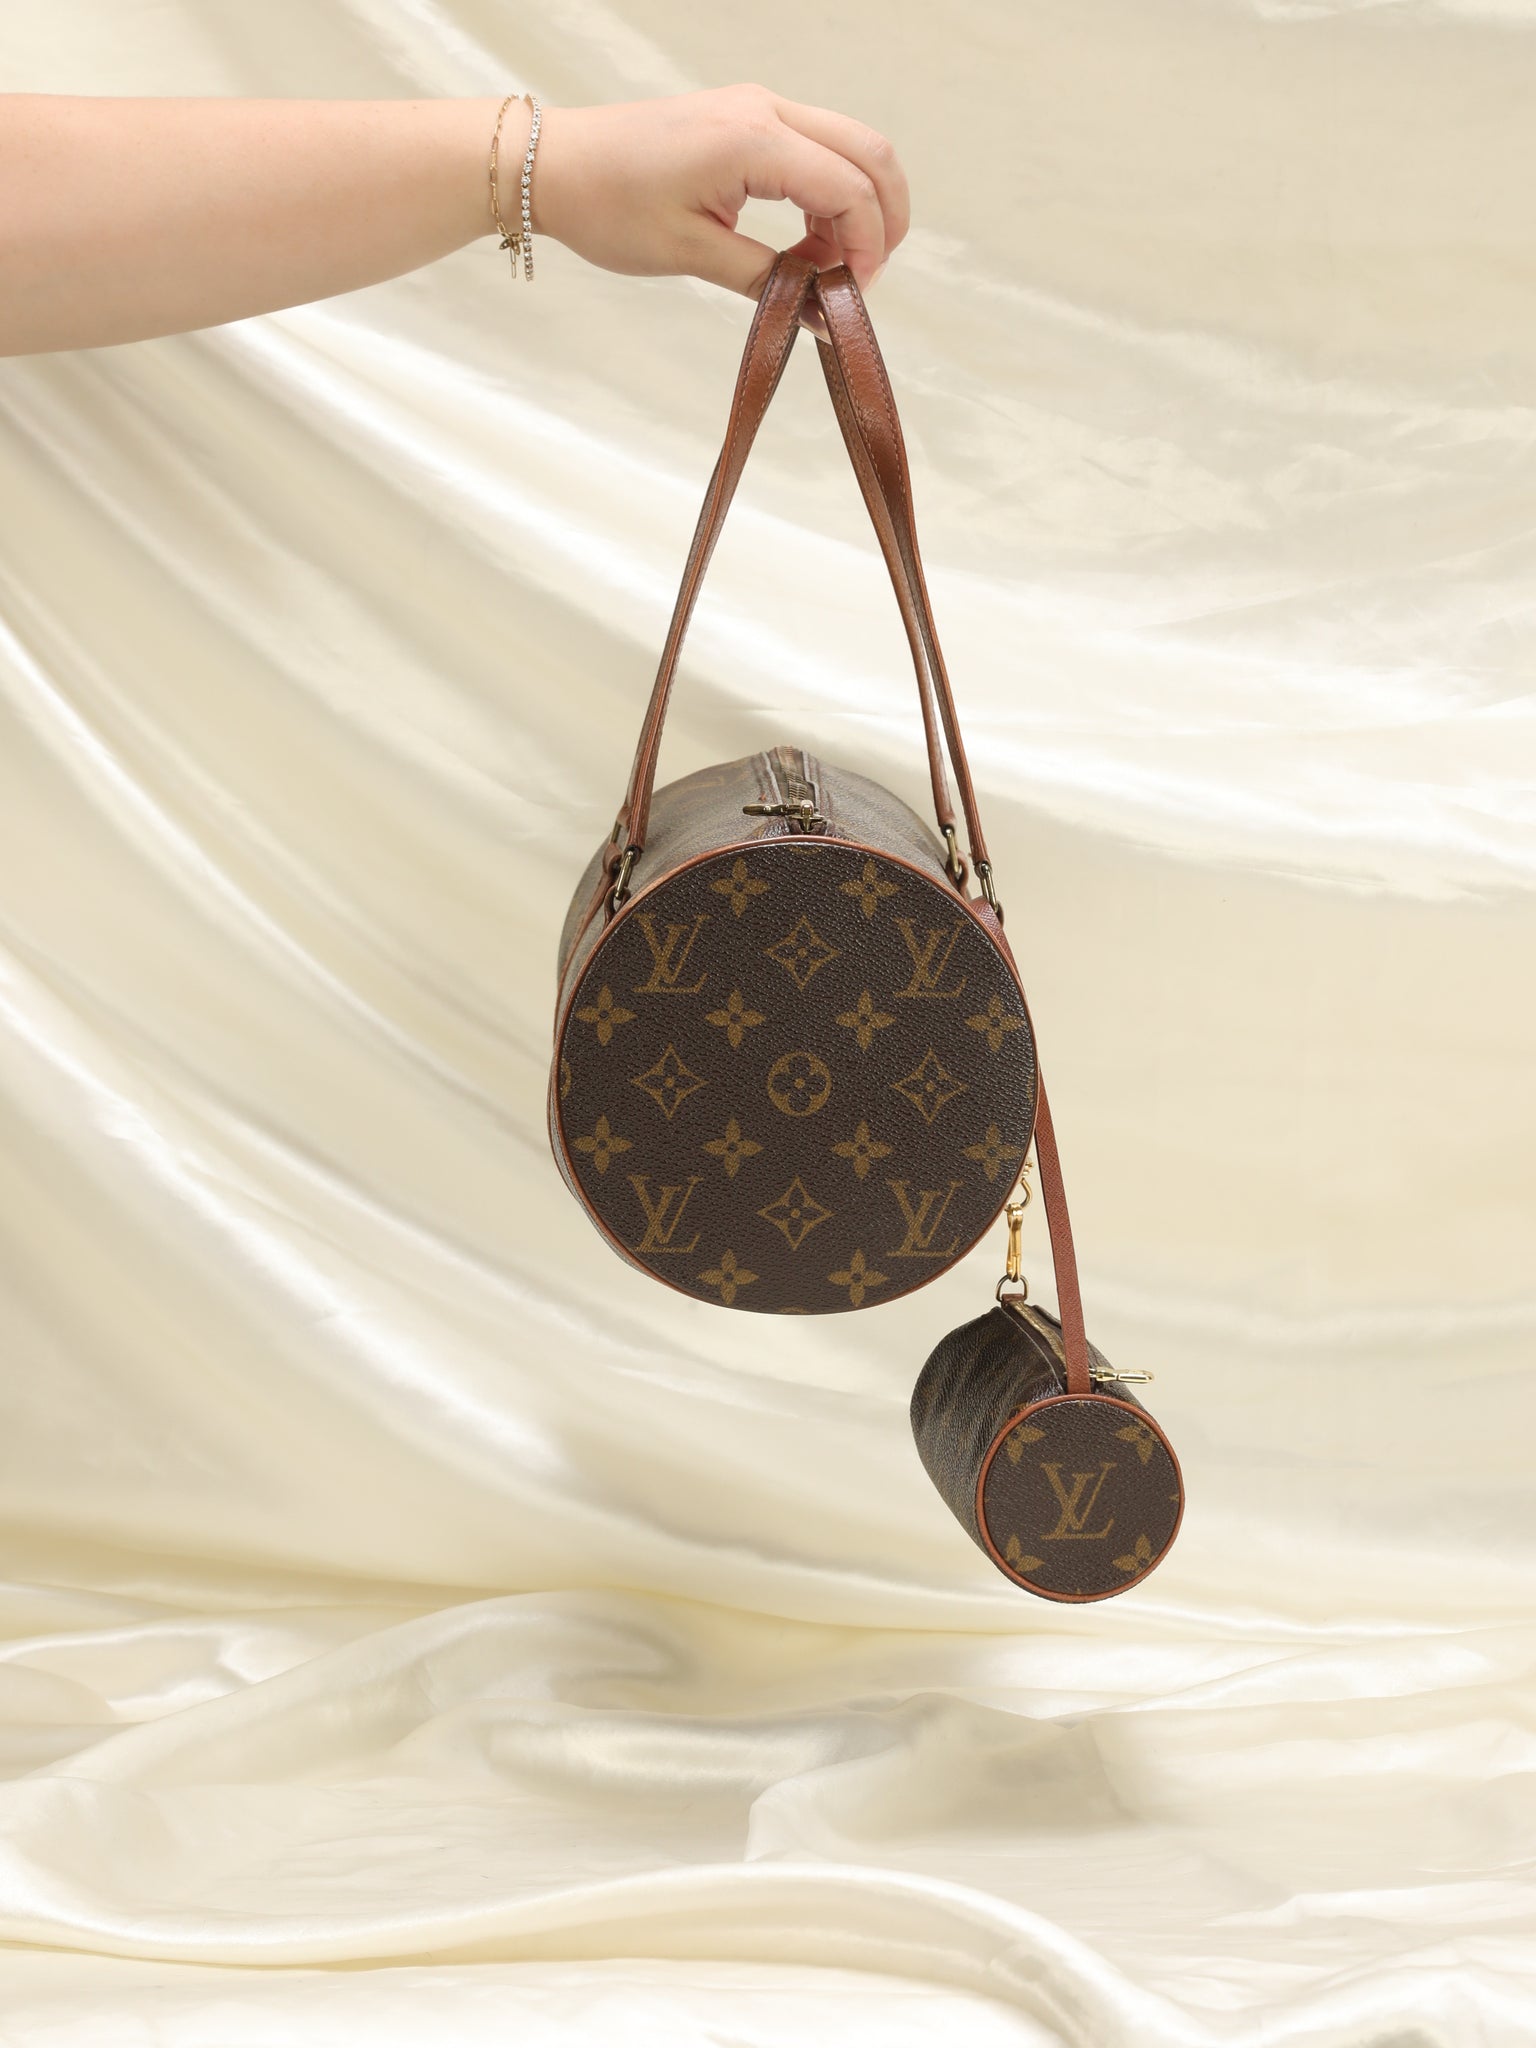 Louis Vuitton Bags: How to Buy Them and the Style to Choose